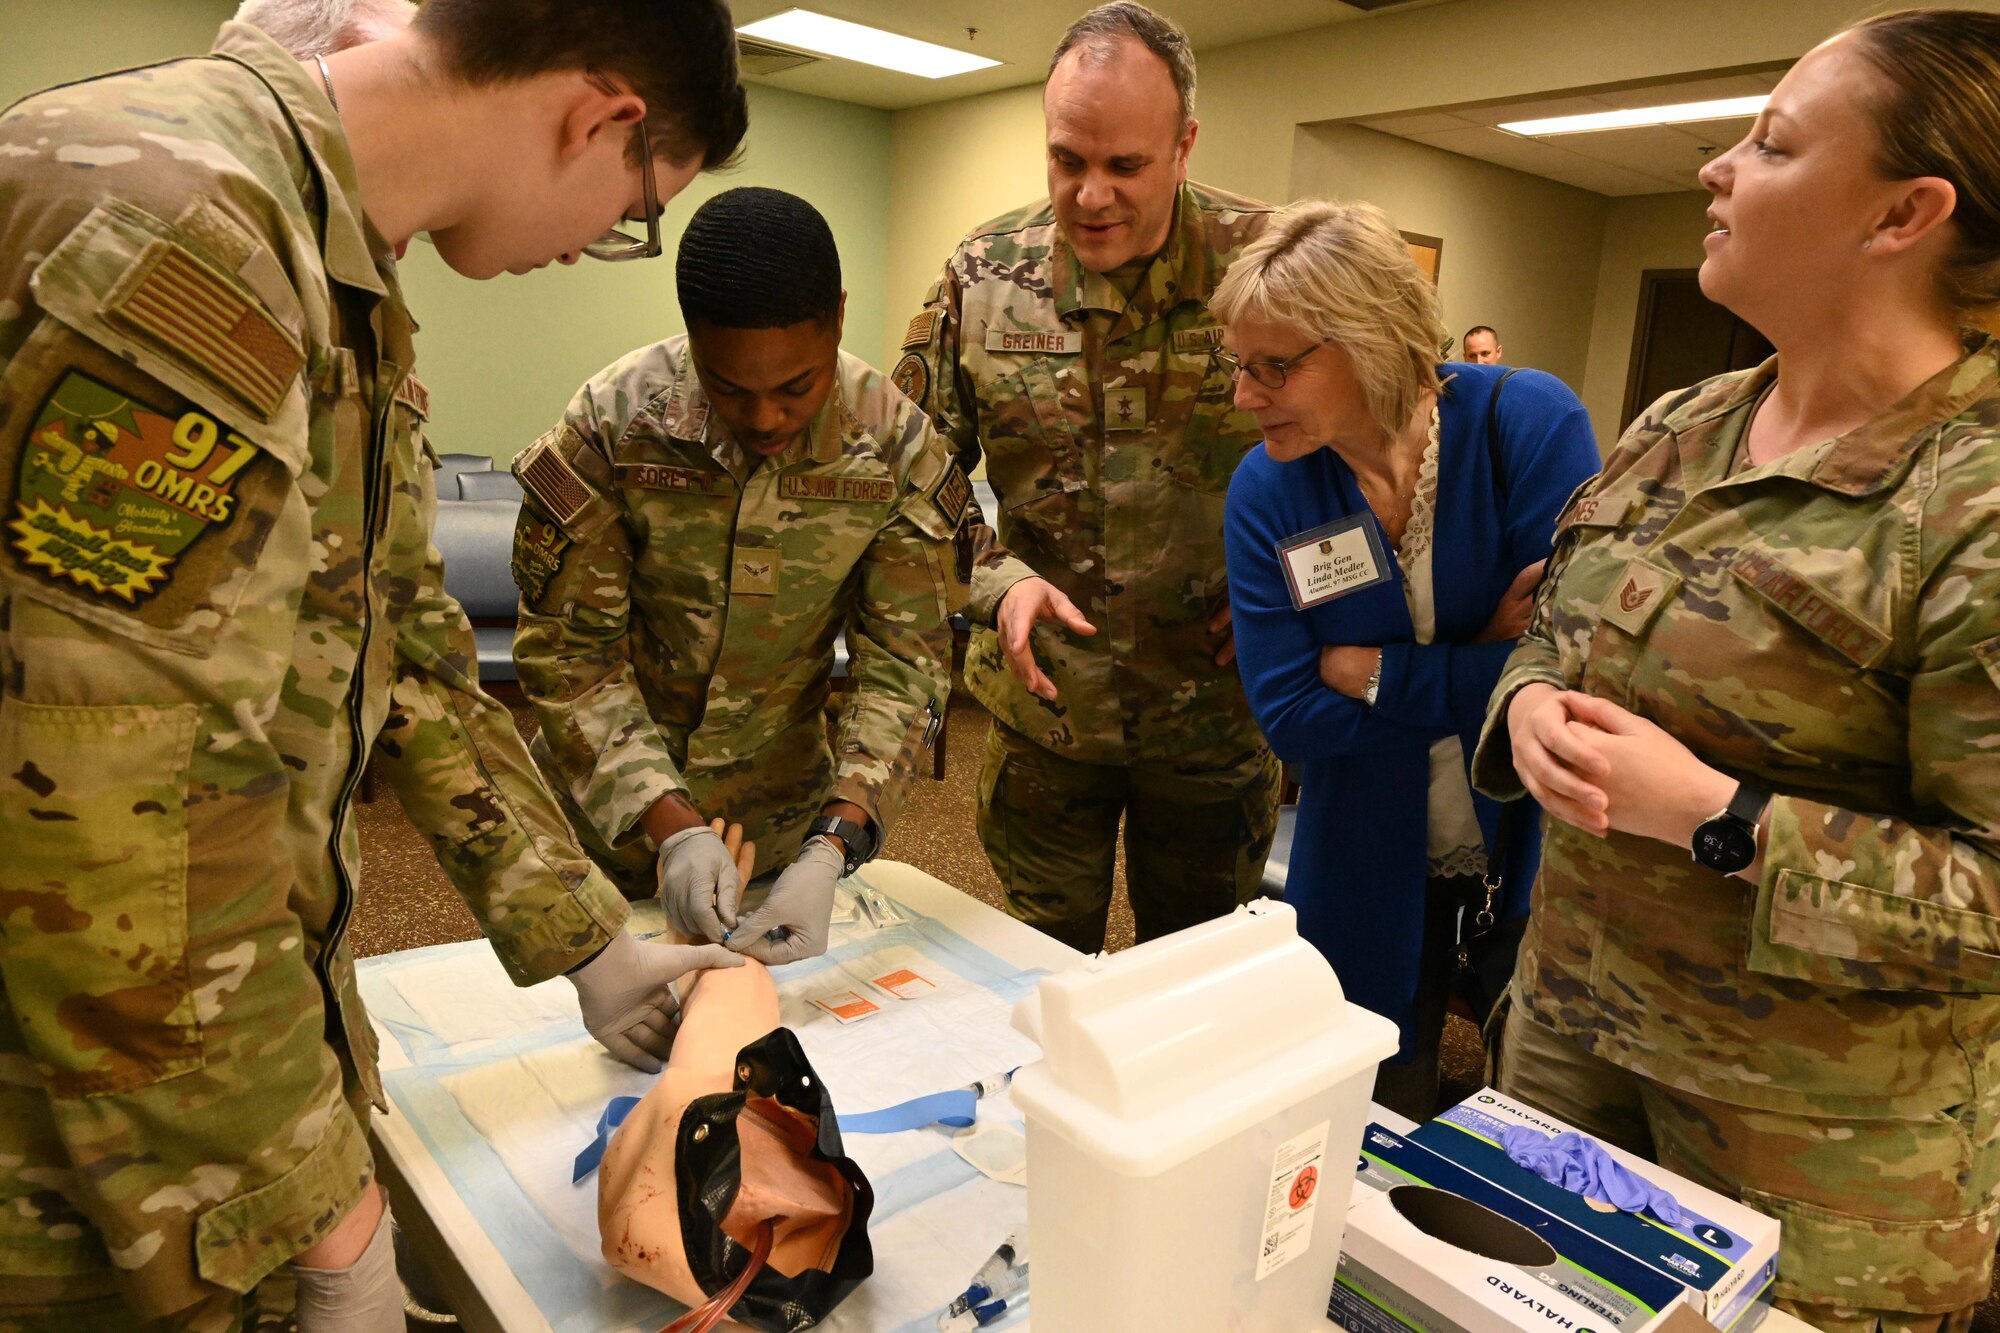 Members of the 97th Operational Medical Readiness Squadron demonstrate tactical combat casualty care to former 97 Air Mobility Wing leaders during the “Legacy of the Spear” event at Altus Air Force Base (AAFB), April 14, 2023. The 97th Medical Group provides critical healthcare operations to Altus AFB Airmen, retirees, and their families. (U.S. Air Force photo by Airman 1st Class Miyah Gray)